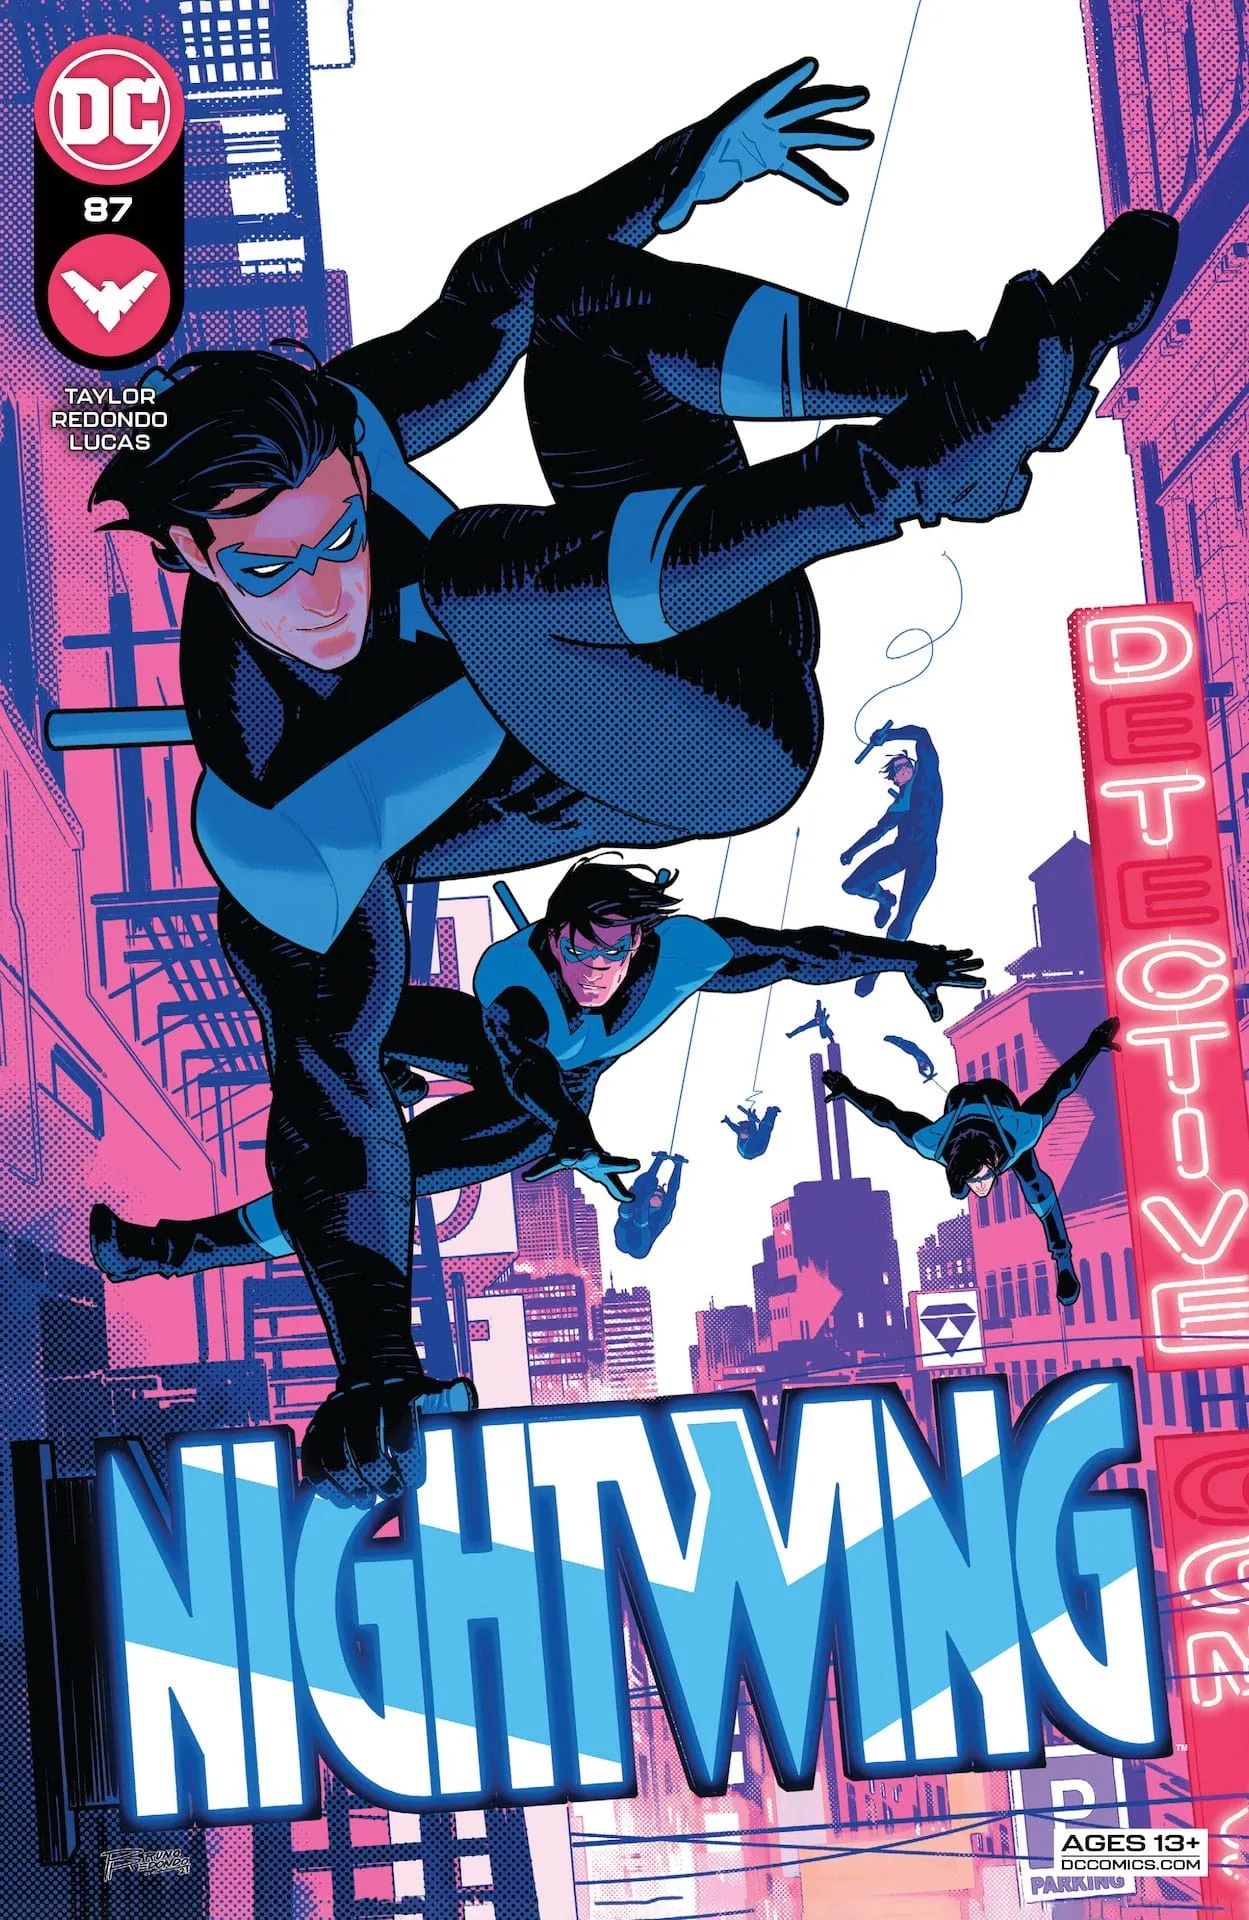 Nightwing Has A Bounty On His Head In DC’s Most Unique Comic Ever